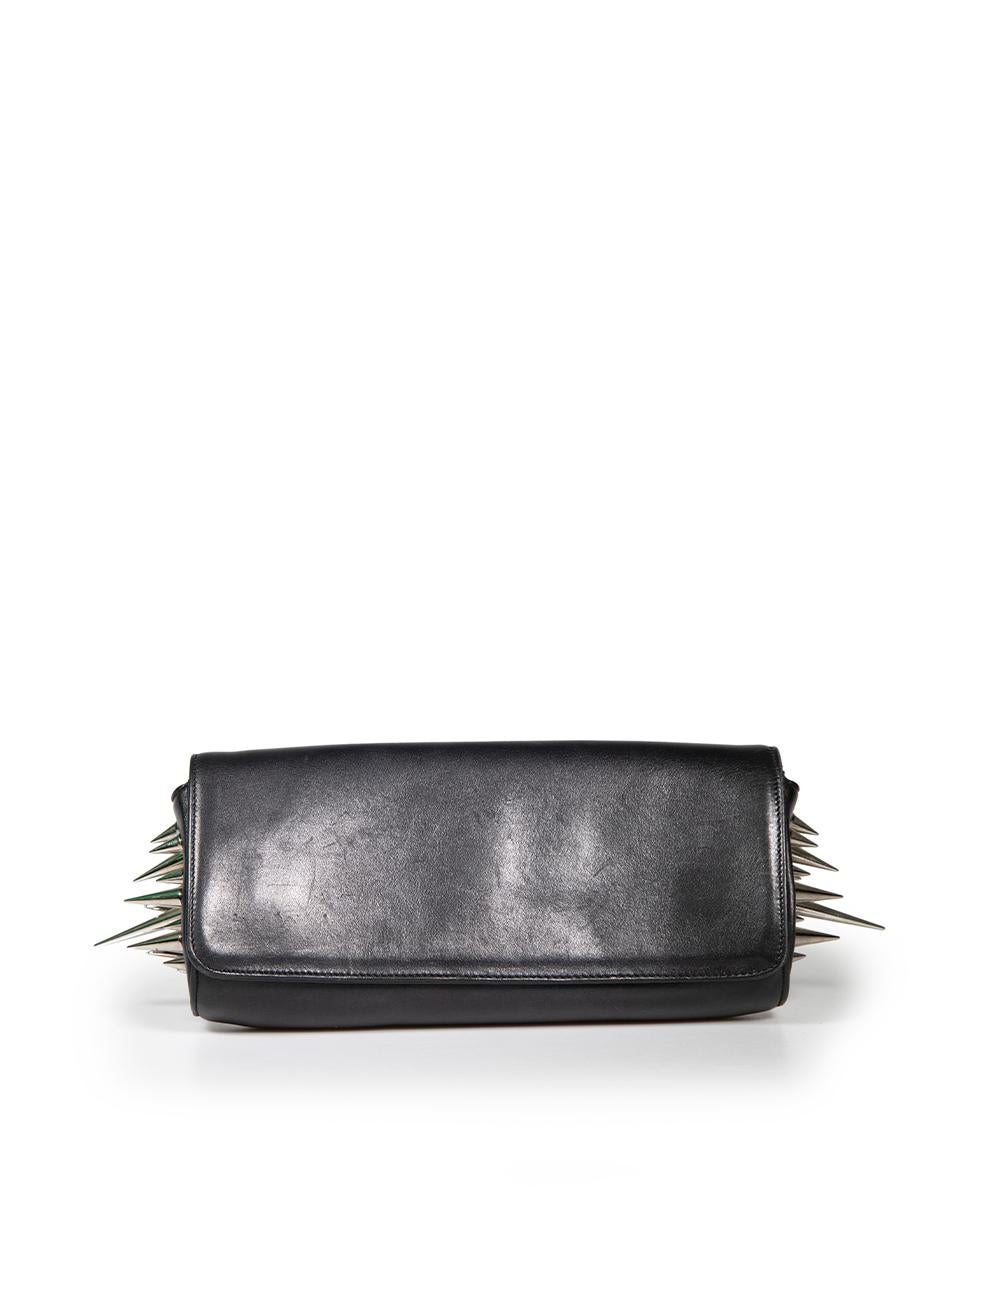 Christian Louboutin Black Leather Marquise Clutch In Good Condition For Sale In London, GB